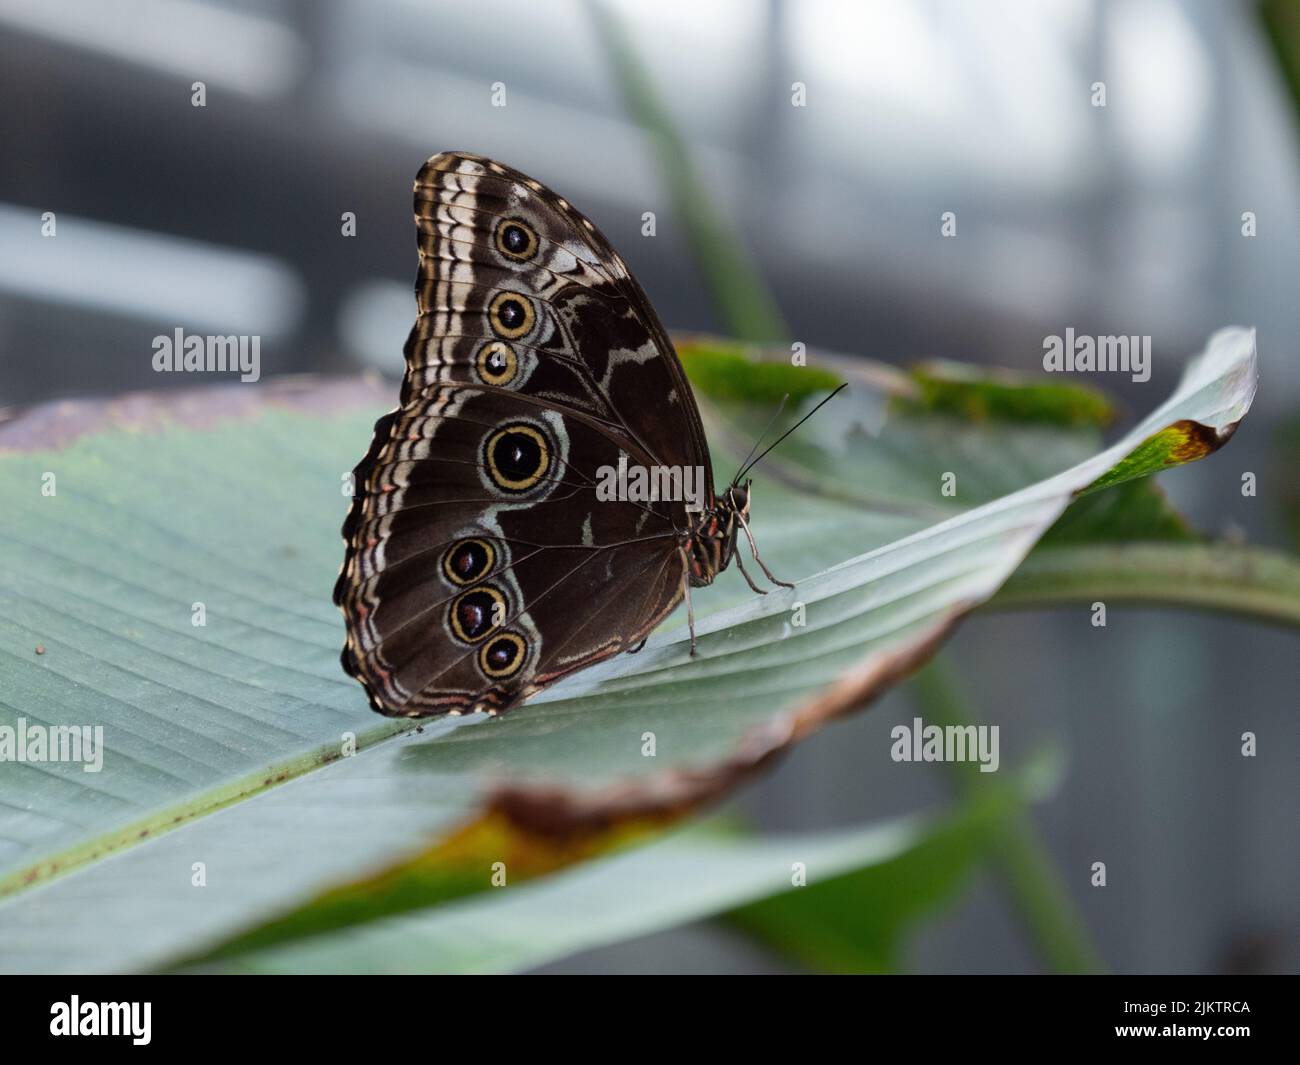 A closeup shot of a Lepidoptera butterfly on a green leaf Stock Photo